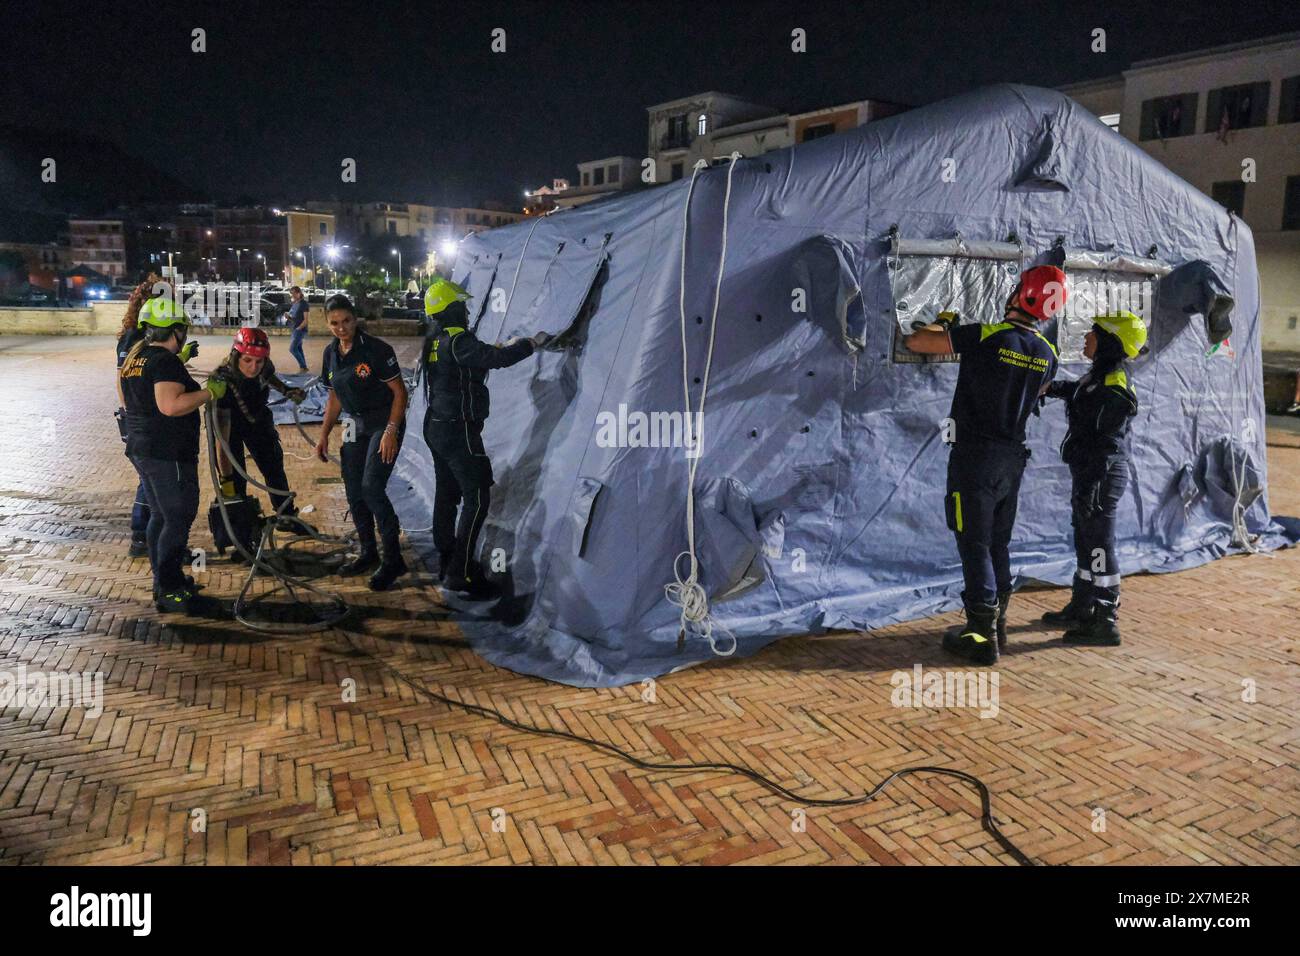 News - Italy: Campi Flegrei, bradisismo Campania s civil protection set up a tensile structure at the port of pozzuoli for people who are not confident about returning to their homes after the earthquake tremors, near Naples, southern Italy, 20 May 2024. The tremor that occurred at 8.10pm with epicentre in the Campi Flegrei was of magnitude 4.4. This was reported by the National Institute of Geophysics and Volcanology, according to which the depth of the quake was three kilometres. Napoli Pozzuoli Italy Copyright: xAntonioxBalascox/xLiveMediax LPN 1364591 Stock Photo